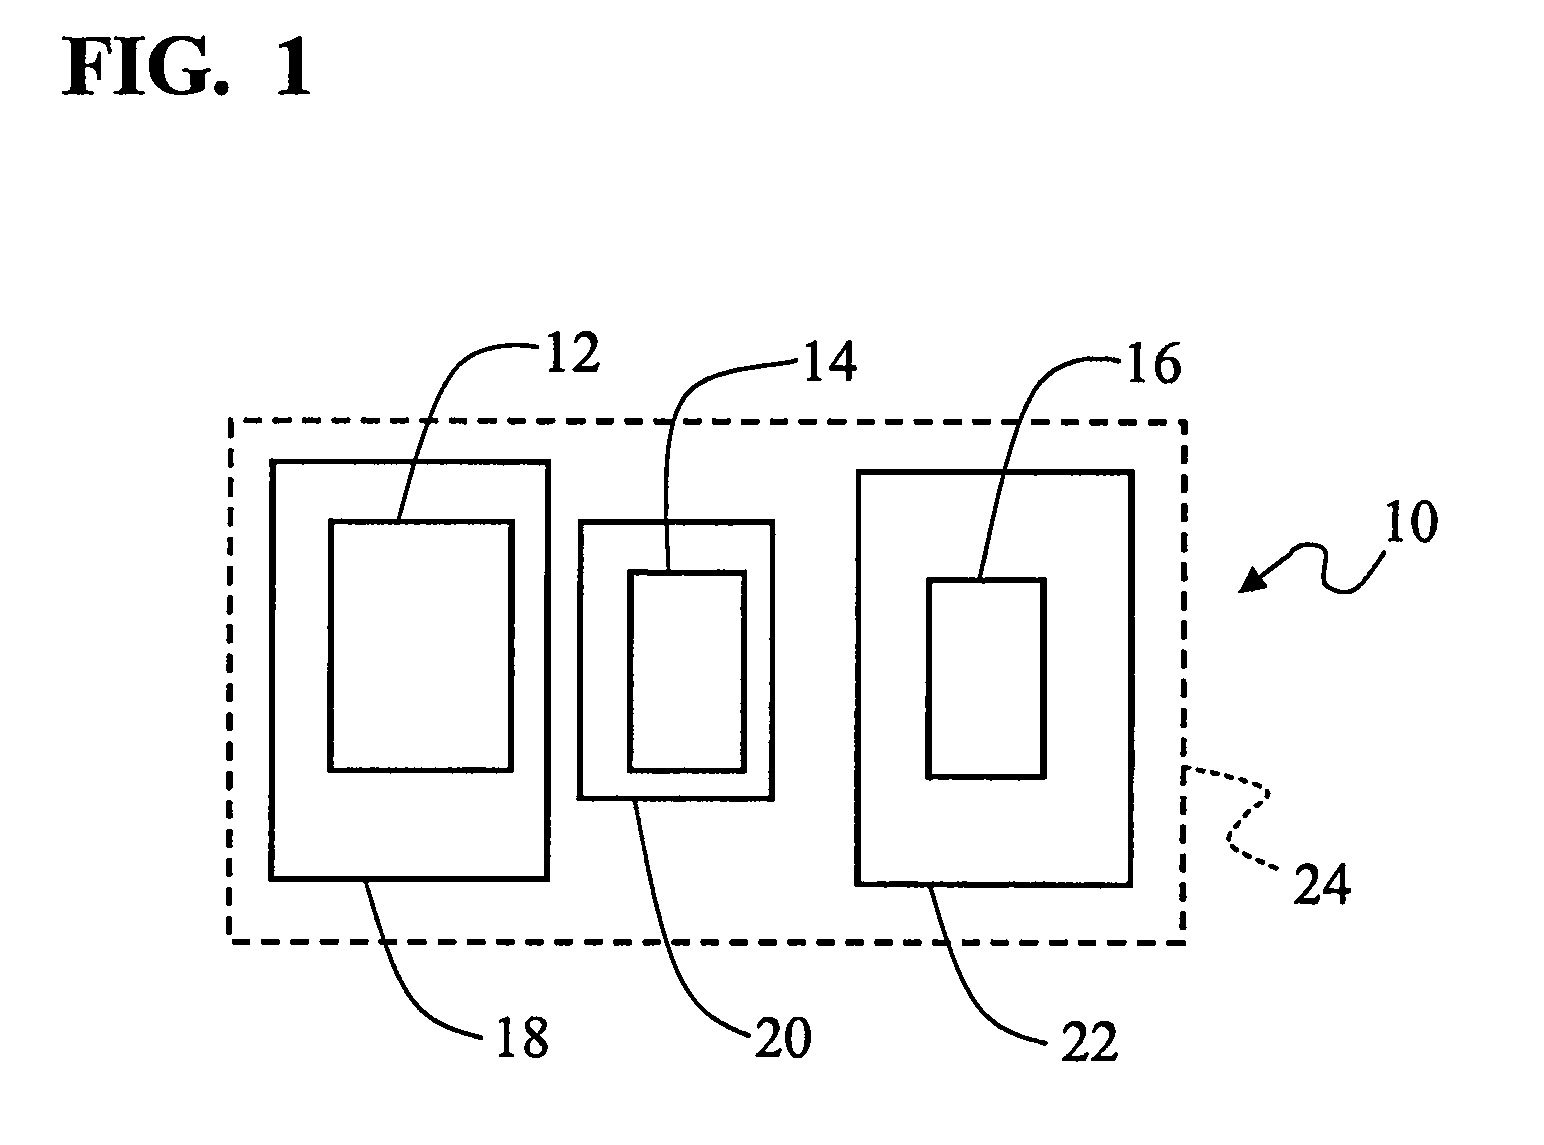 Method of making a dental implant and prosthetic device